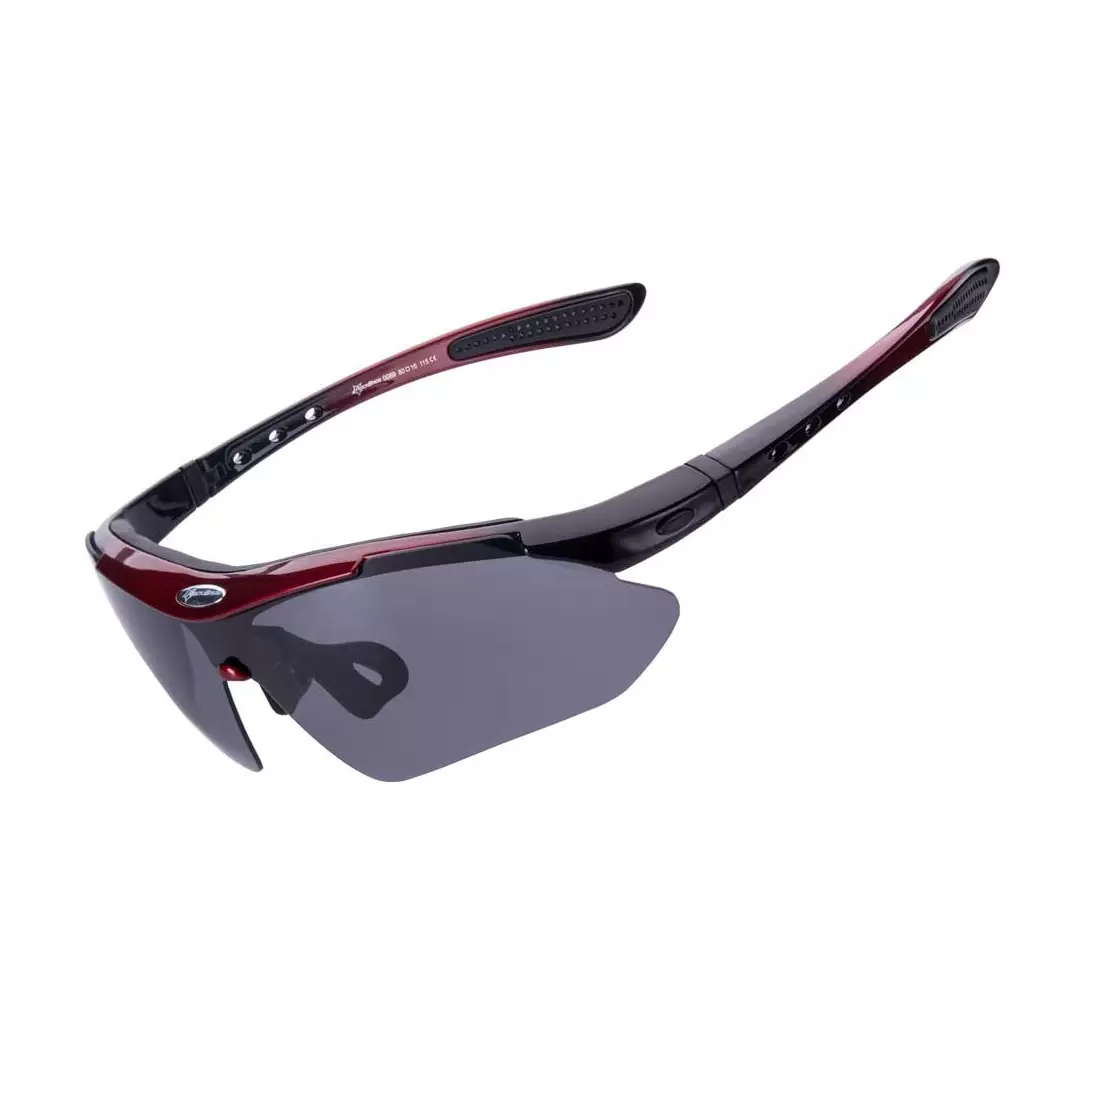 RockBros 10001 bicycle / sports goggles with polarized 5 interchangeable lenses black-red